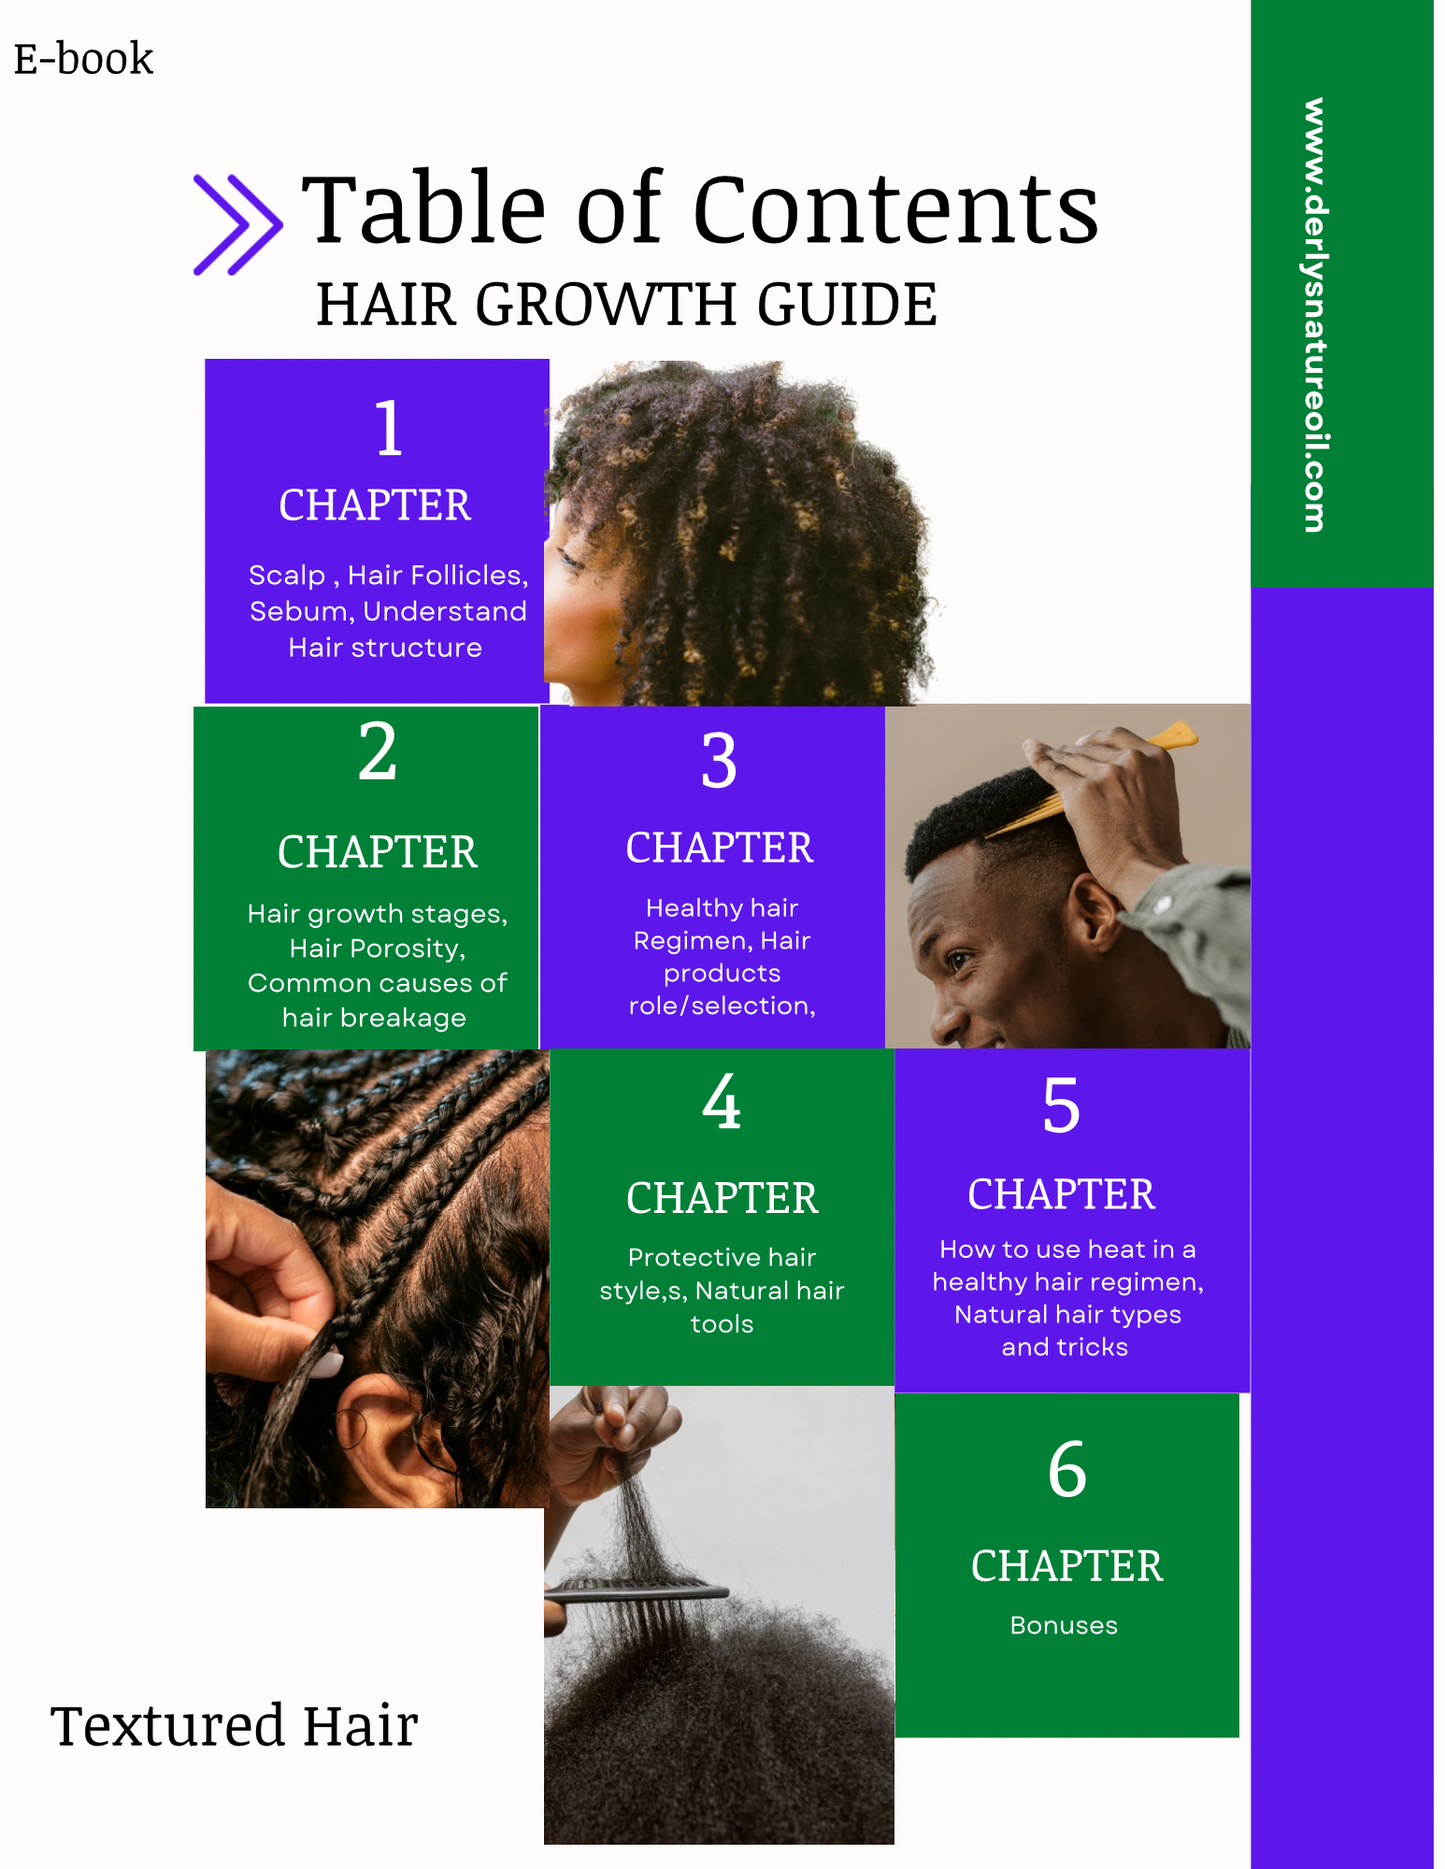 Derly's Nature Oil Hair Growth Guide (E-BOOK)